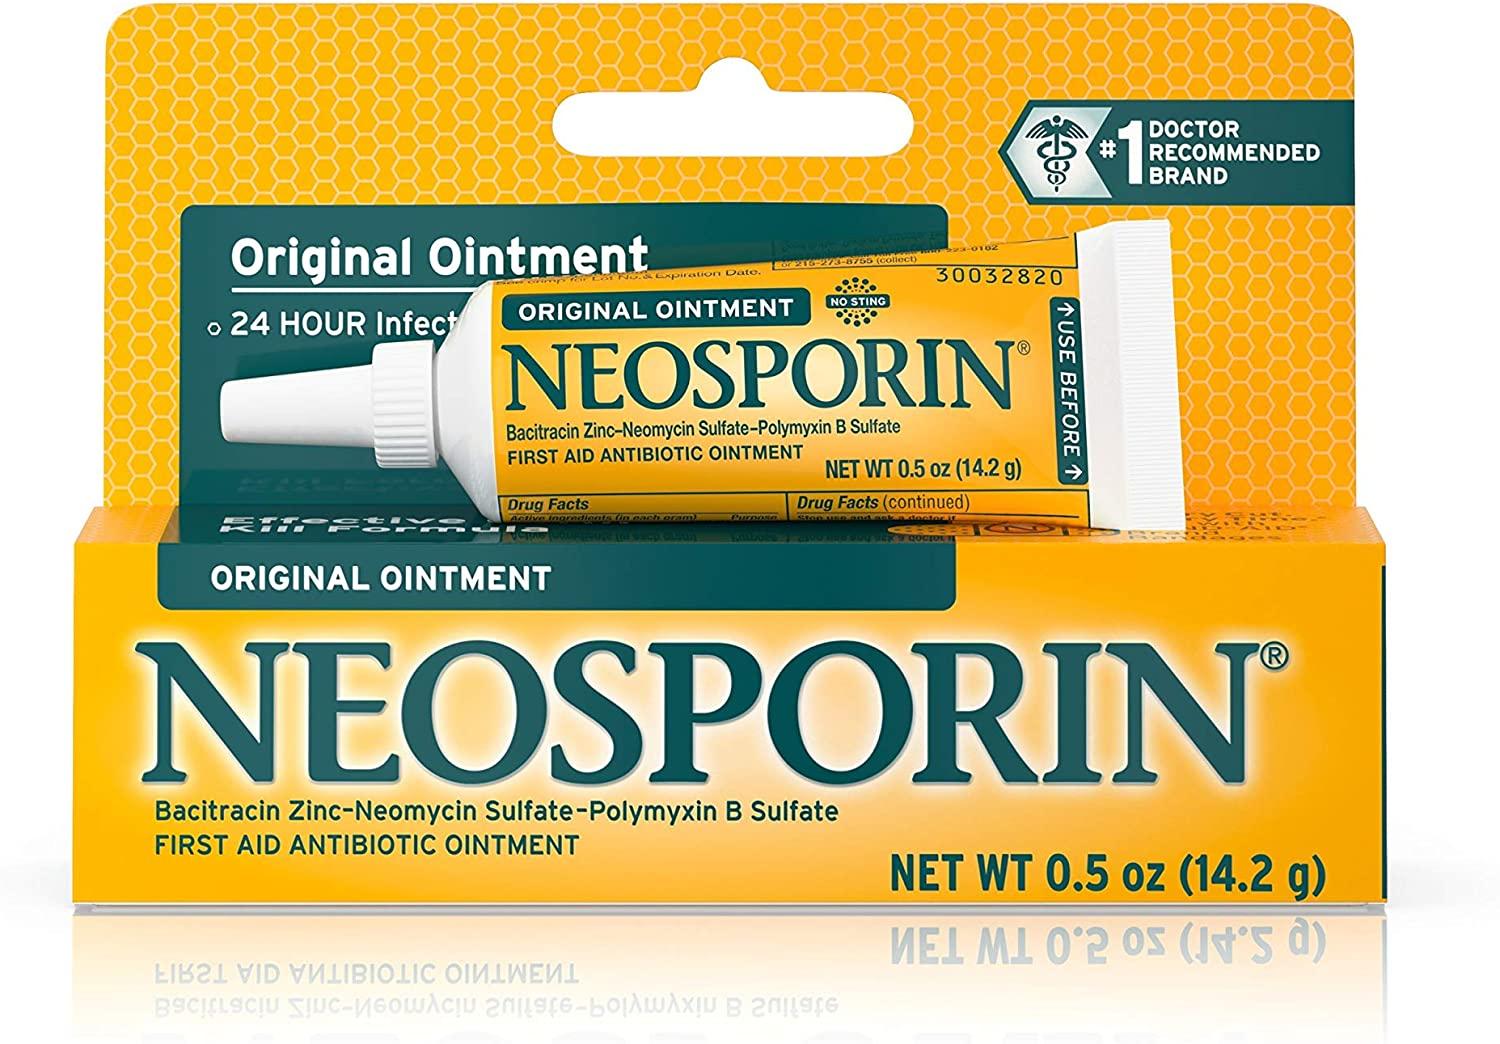 Neosporin Original First Aid Antibiotic Ointment for $3.79 Shipped